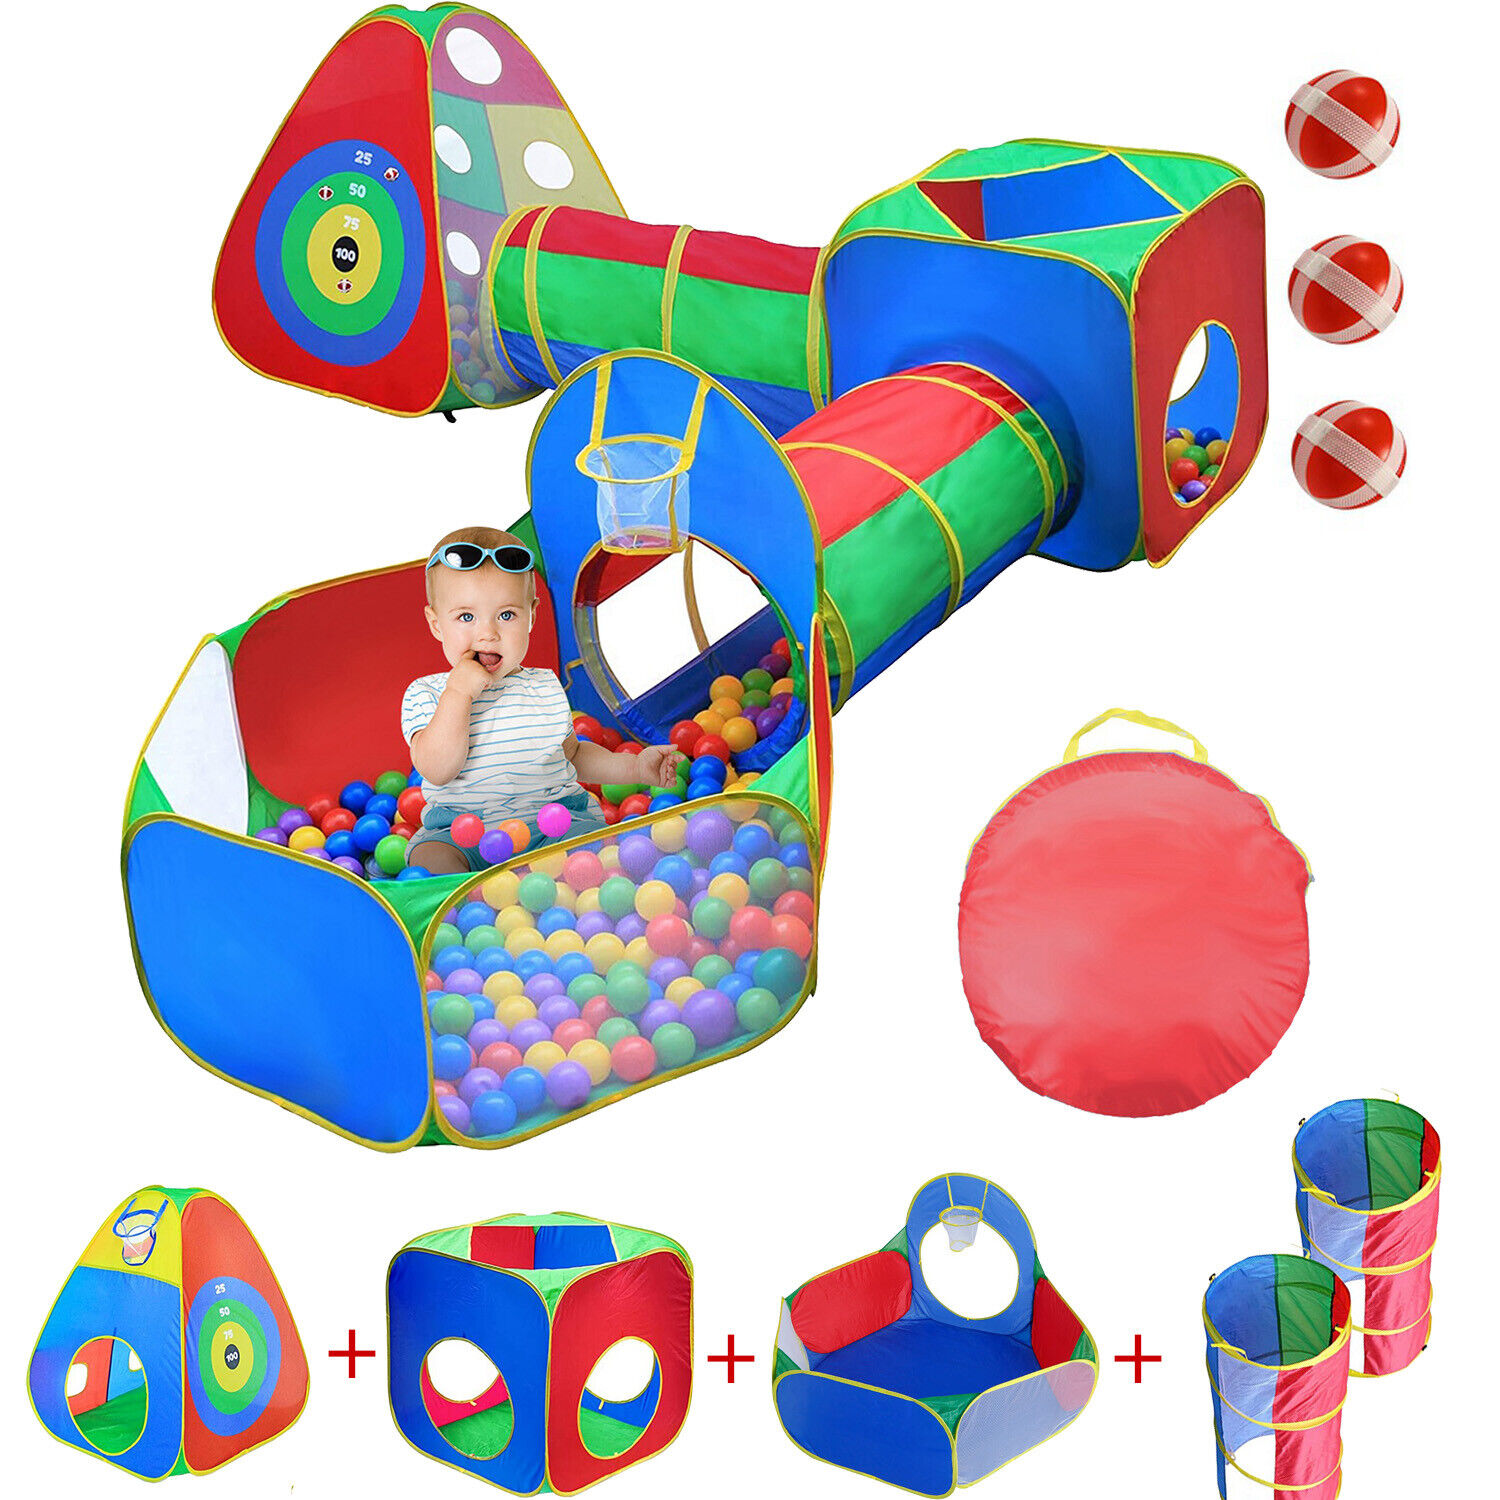 5-in-1 Kids Ball Pit Play Tent w/2 Crawl Tunnel Portable Travel Home Play House sunshining168 Does Not Apply